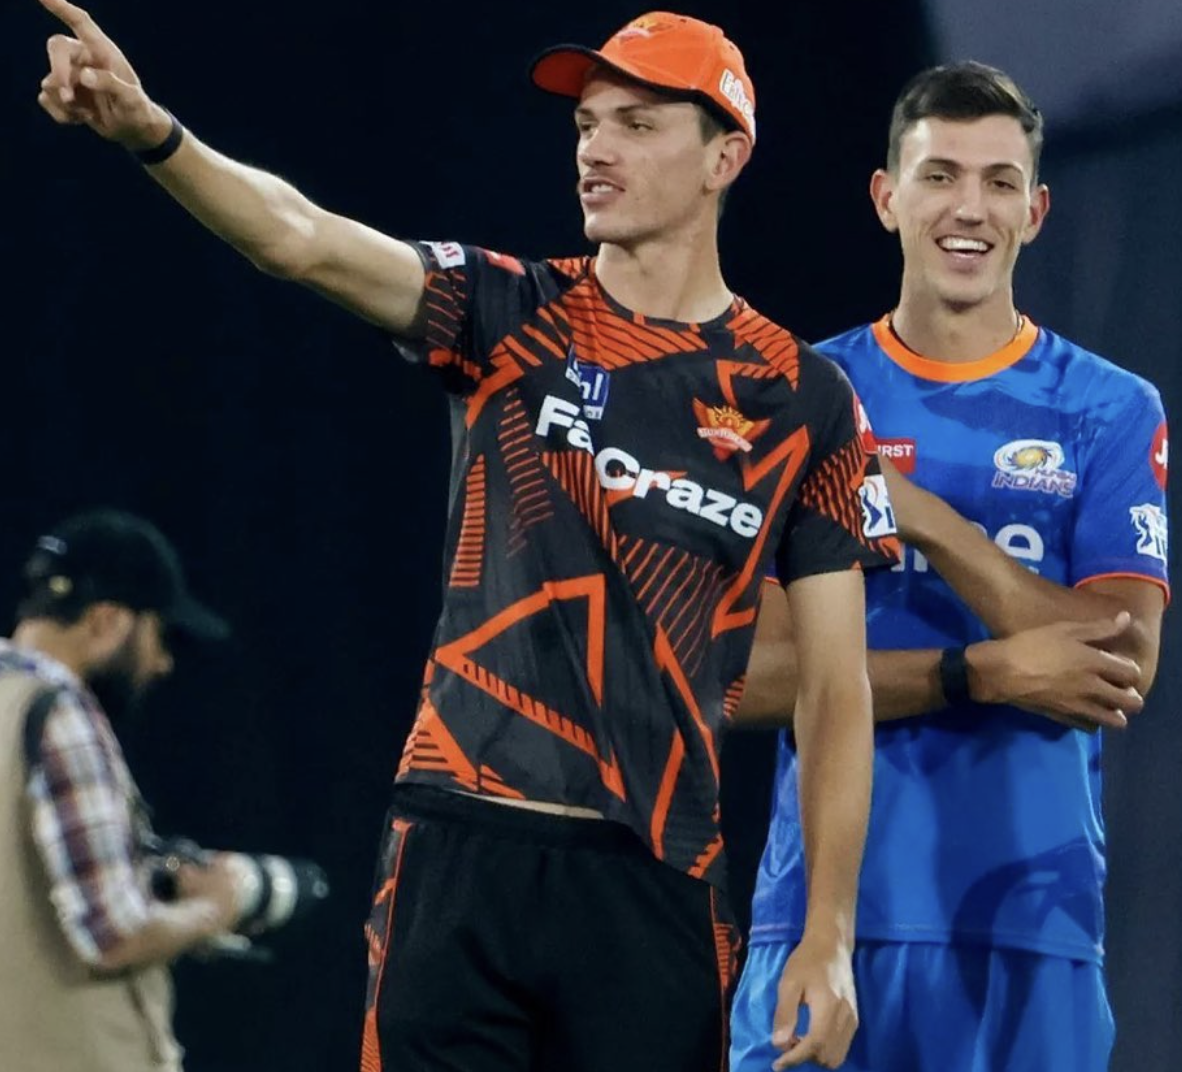 Duan and Marco Jansen become the latest pair of brothers to play in the IPL.